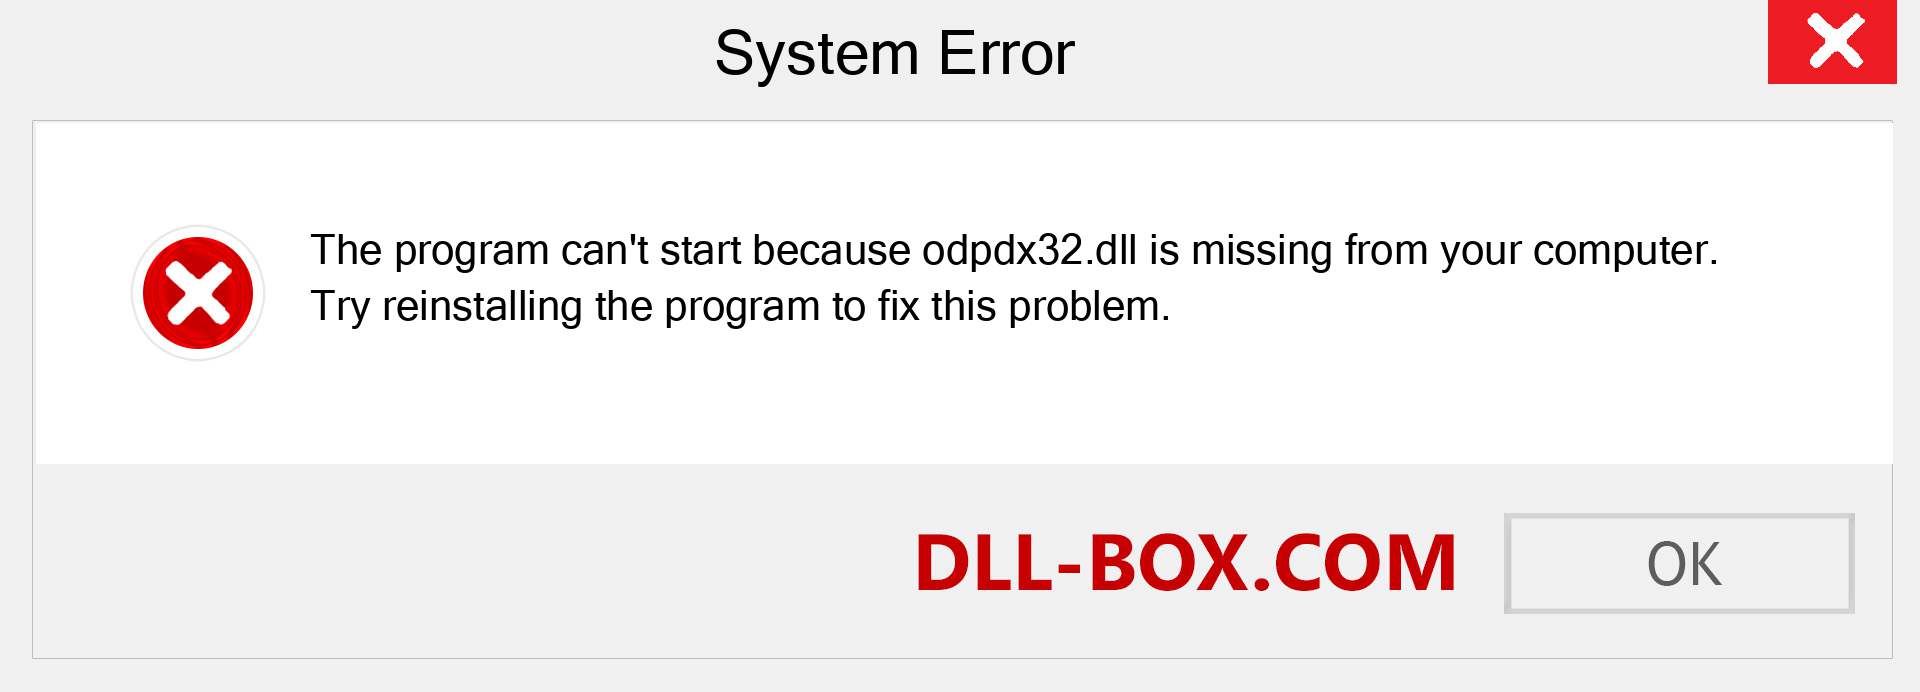  odpdx32.dll file is missing?. Download for Windows 7, 8, 10 - Fix  odpdx32 dll Missing Error on Windows, photos, images